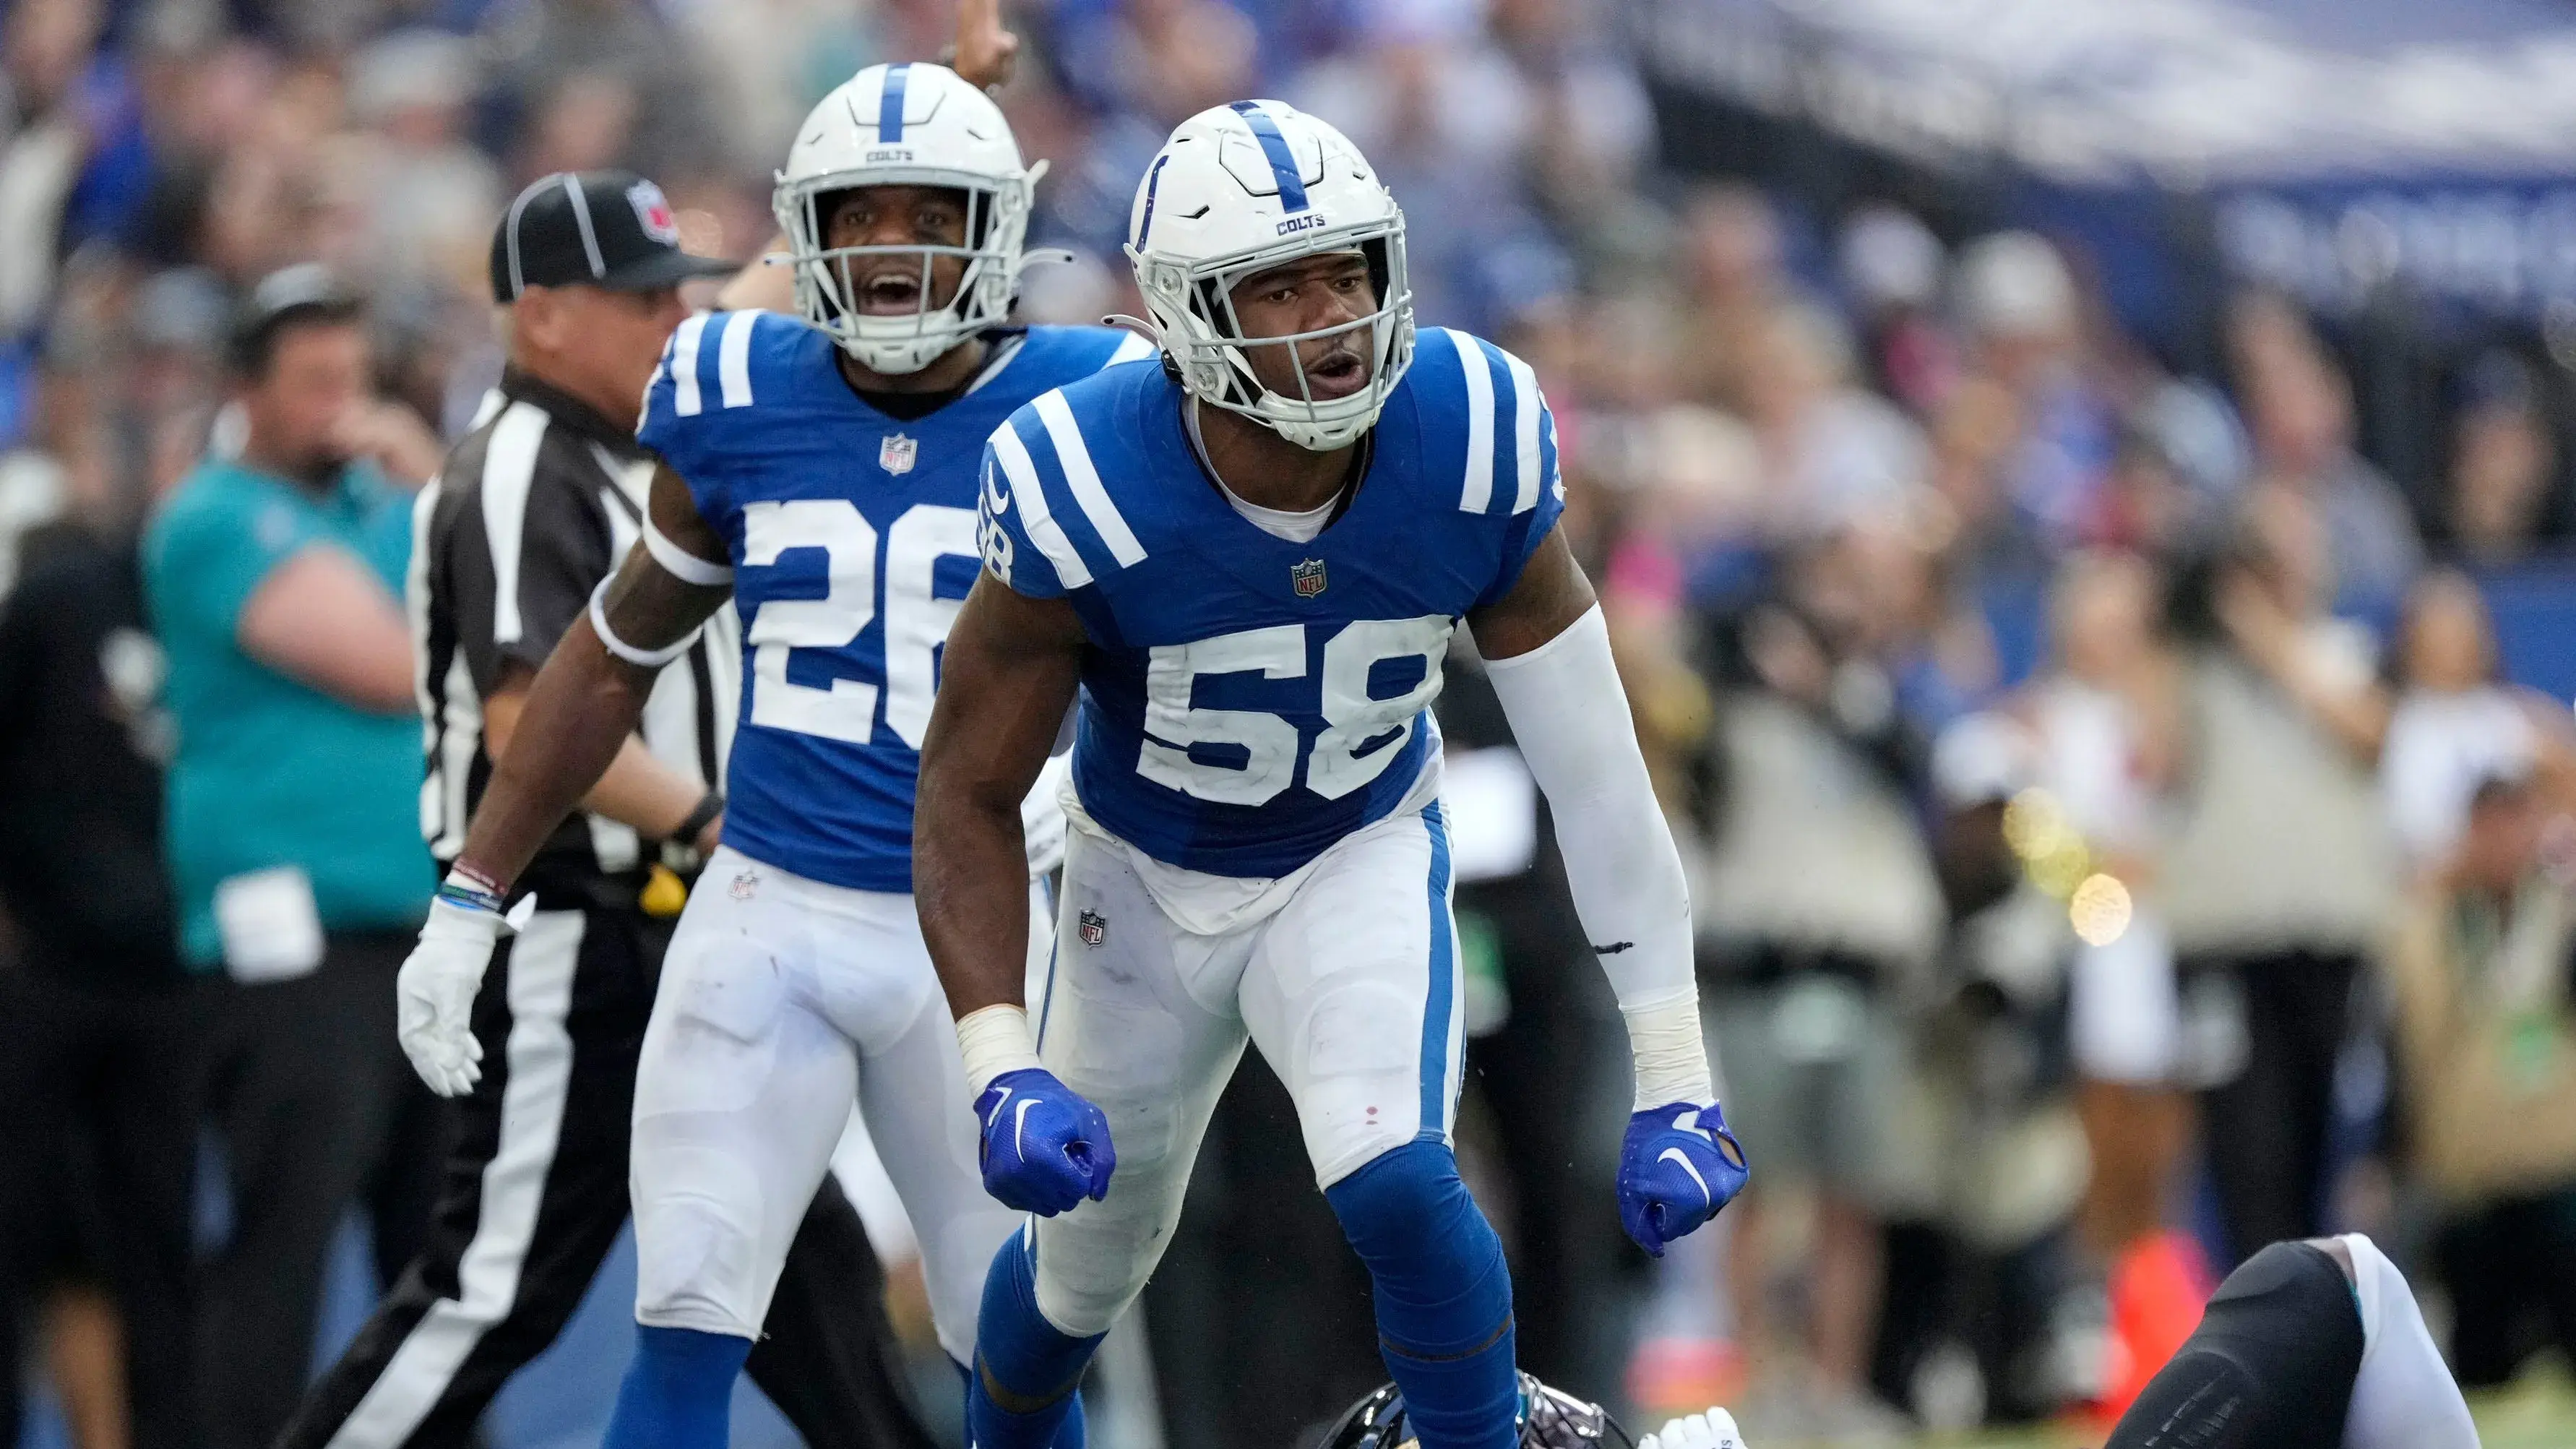 Indianapolis Colts safety Rodney McLeod Jr. (26) and Indianapolis Colts linebacker Bobby Okereke (58) celebrate a defensive stop Sunday, Oct. 16, 2022, during a game against the Jacksonville Jaguars at Lucas Oil Stadium in Indianapolis. / © Robert Scheer/IndyStar / USA TODAY NETWORK